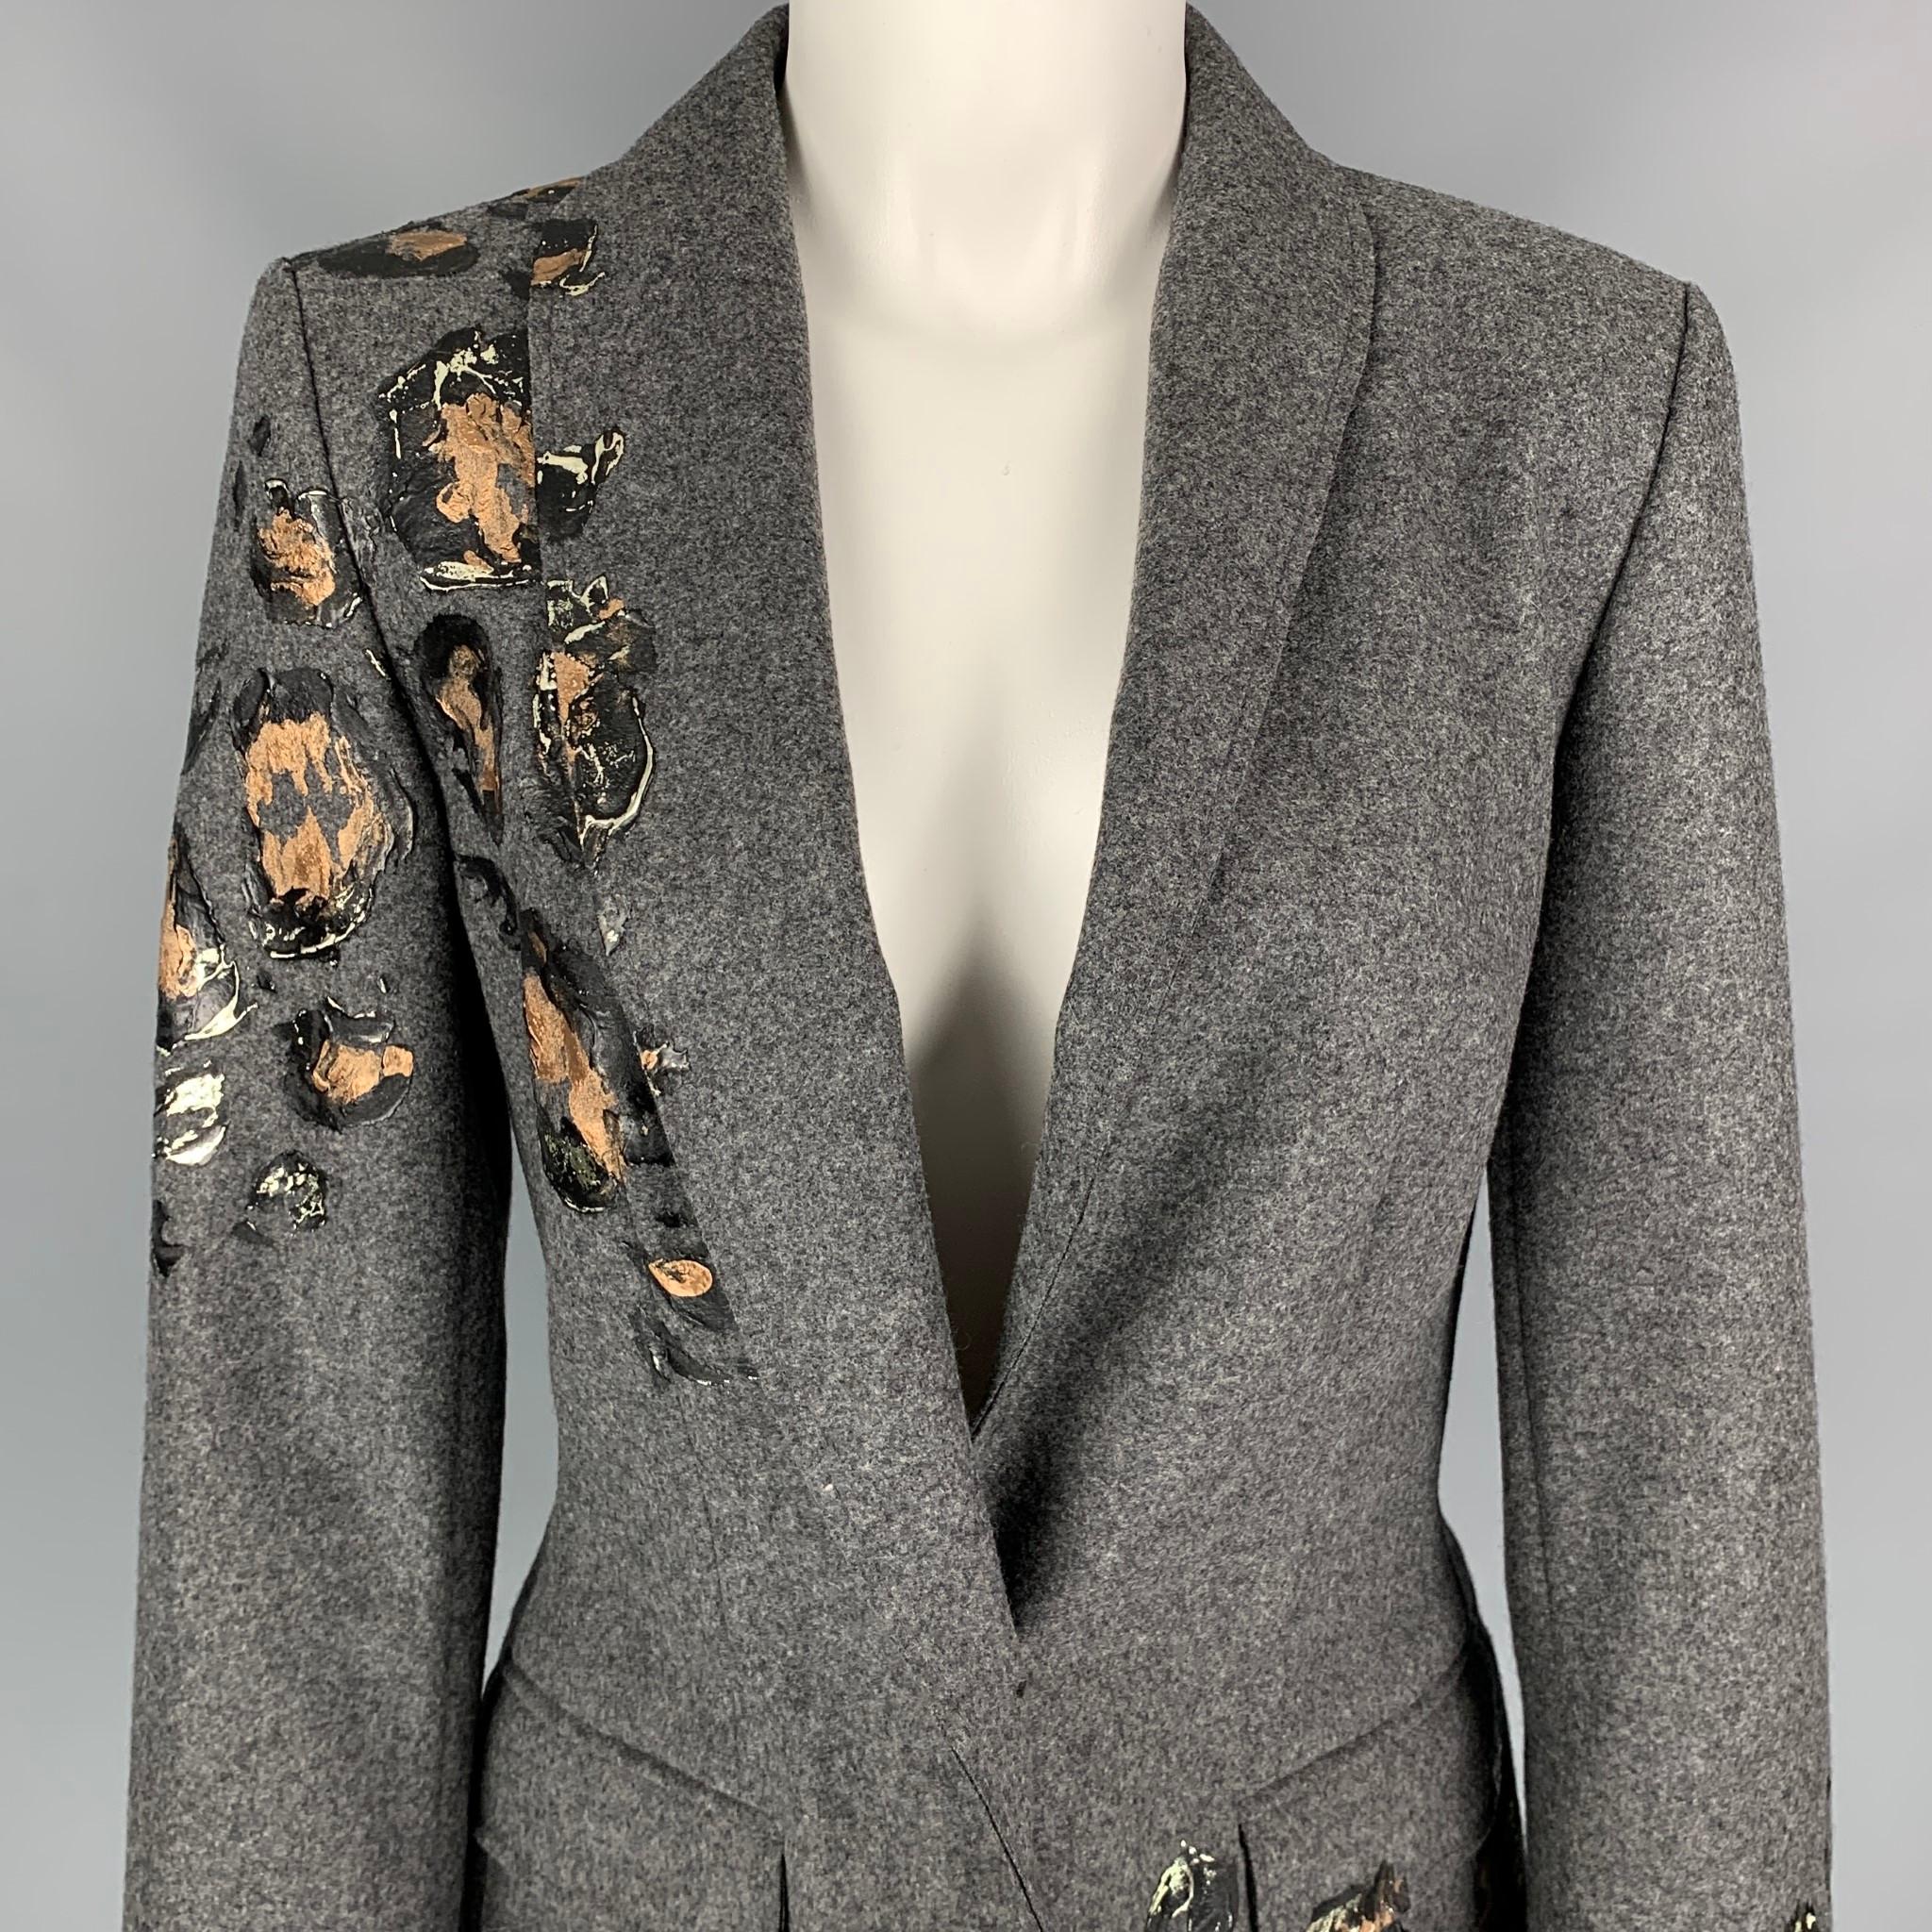 ESCADA jacket comes in a grey virgin wool featuring a shawl collar, paint splattered details, flap pocket, and a single button closure. 

New With Tags. 
Marked: 36
Original Retail Price: $2,195.00

Measurements:

Shoulder: 16 in.
Bust: 36